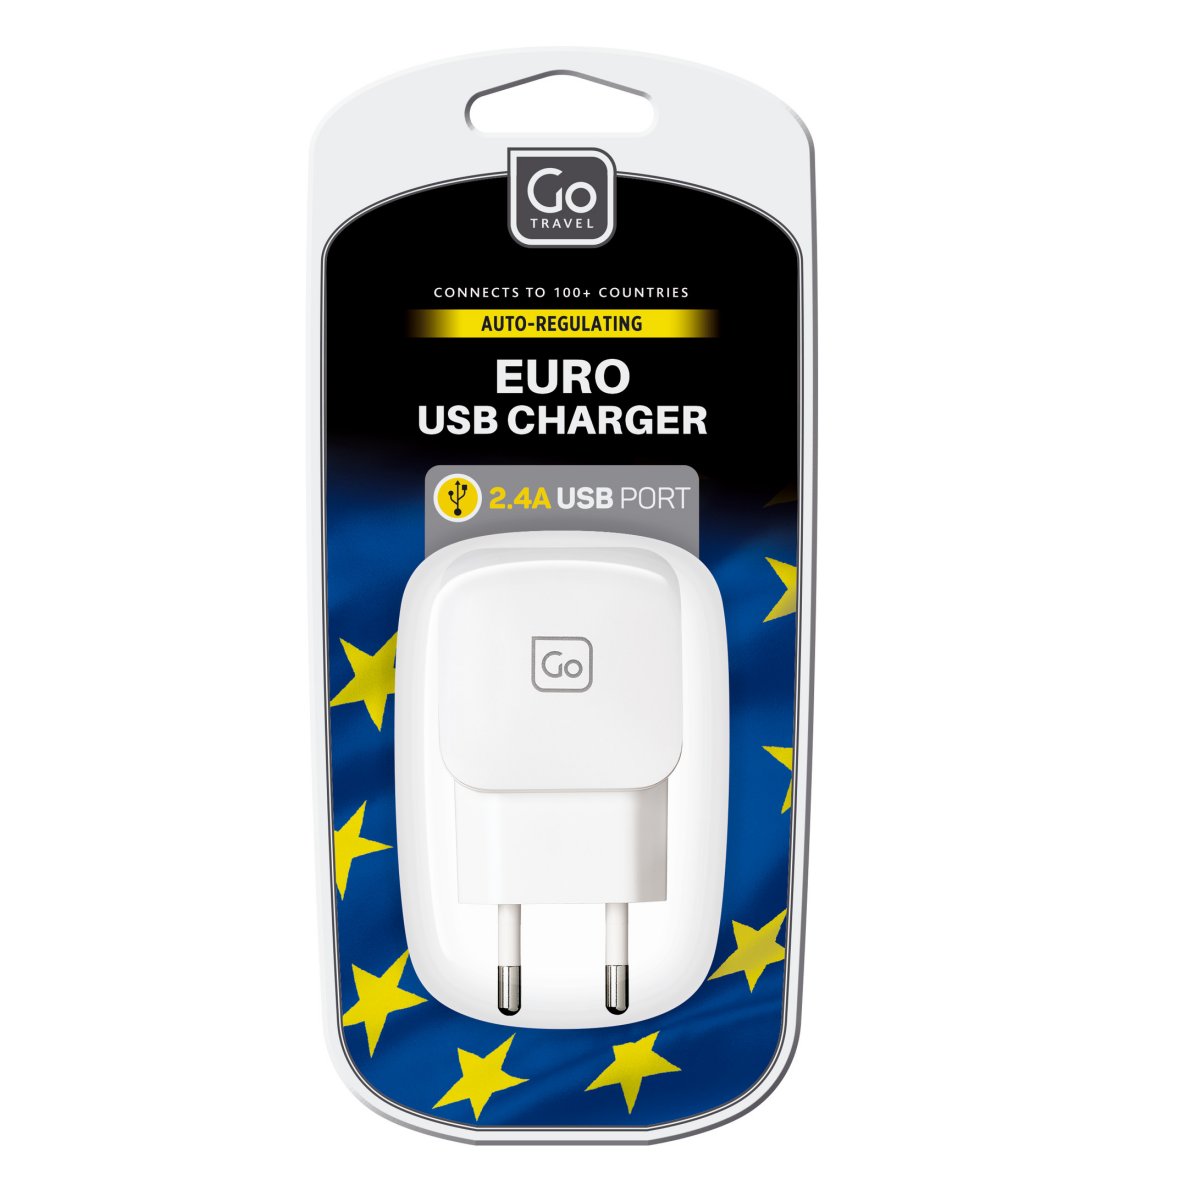 Image of EU USB Charger 2.4A